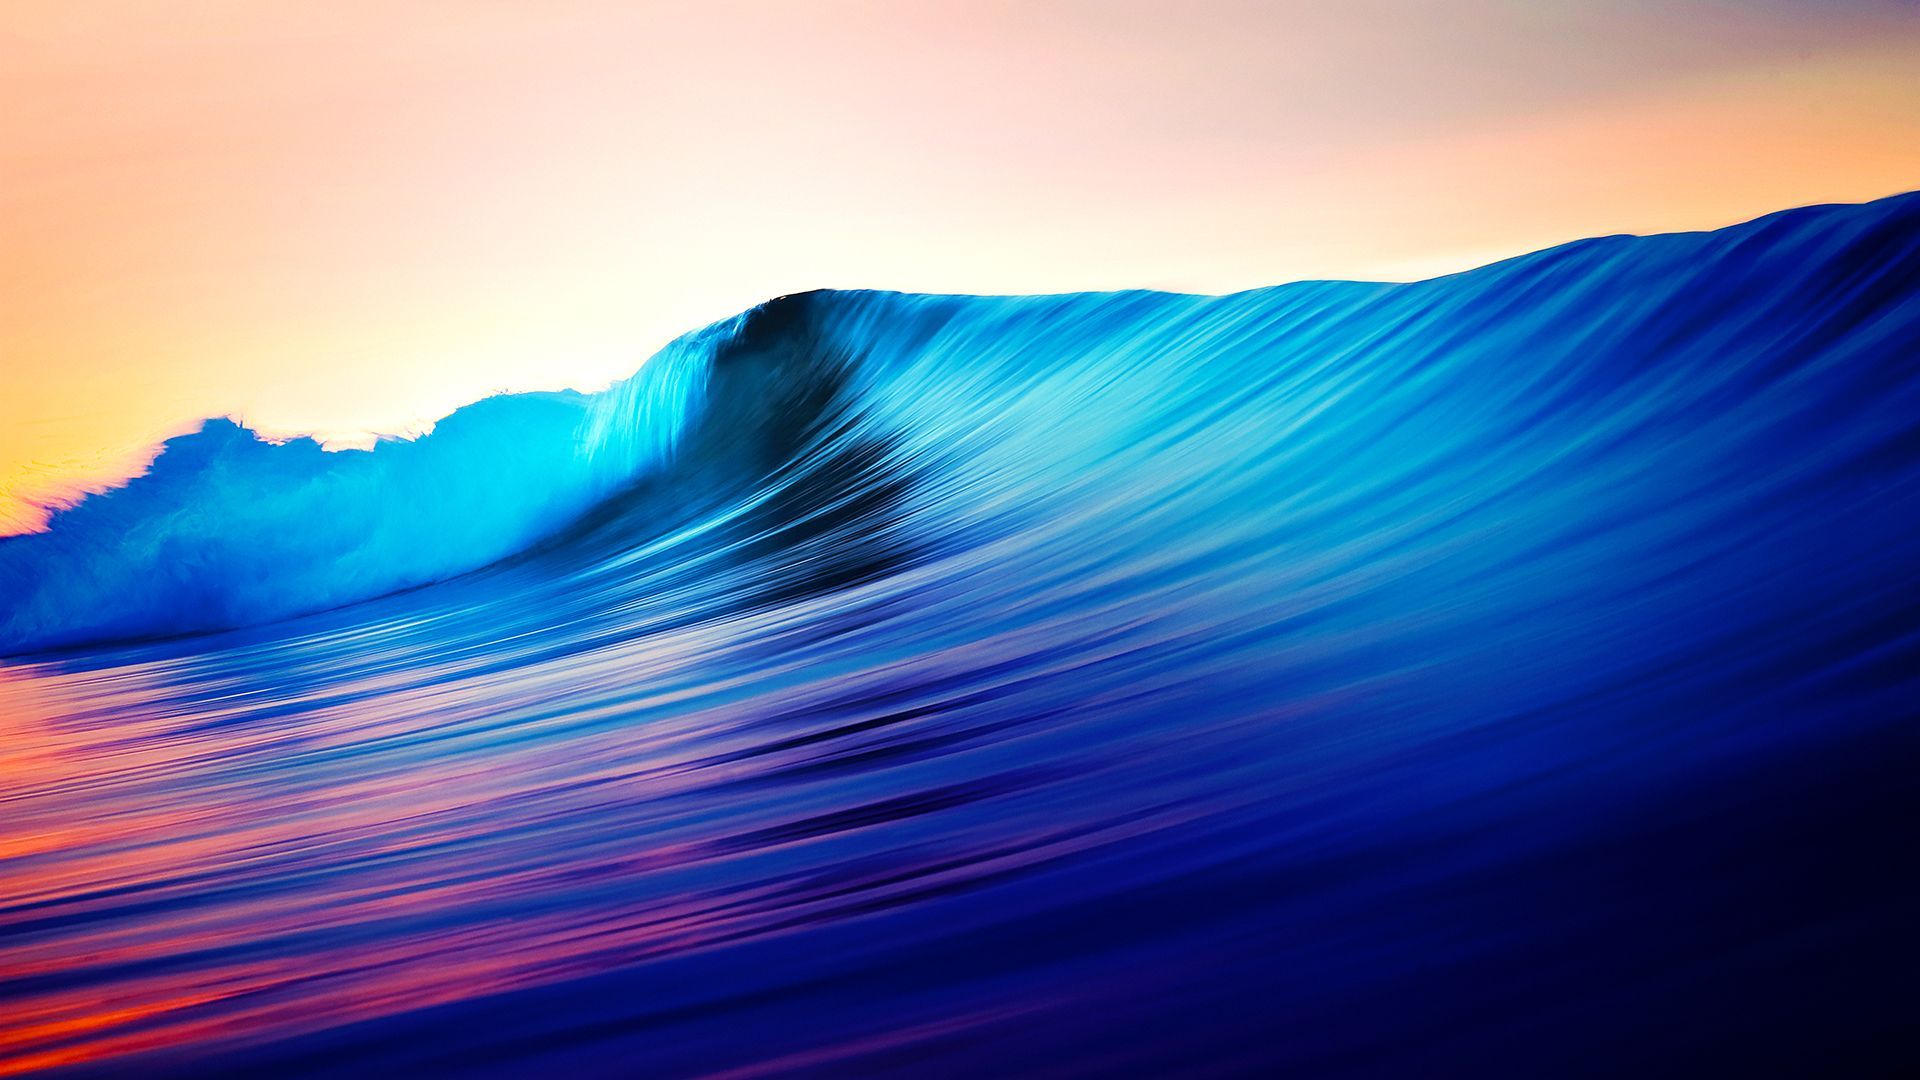 Colorful Waves image